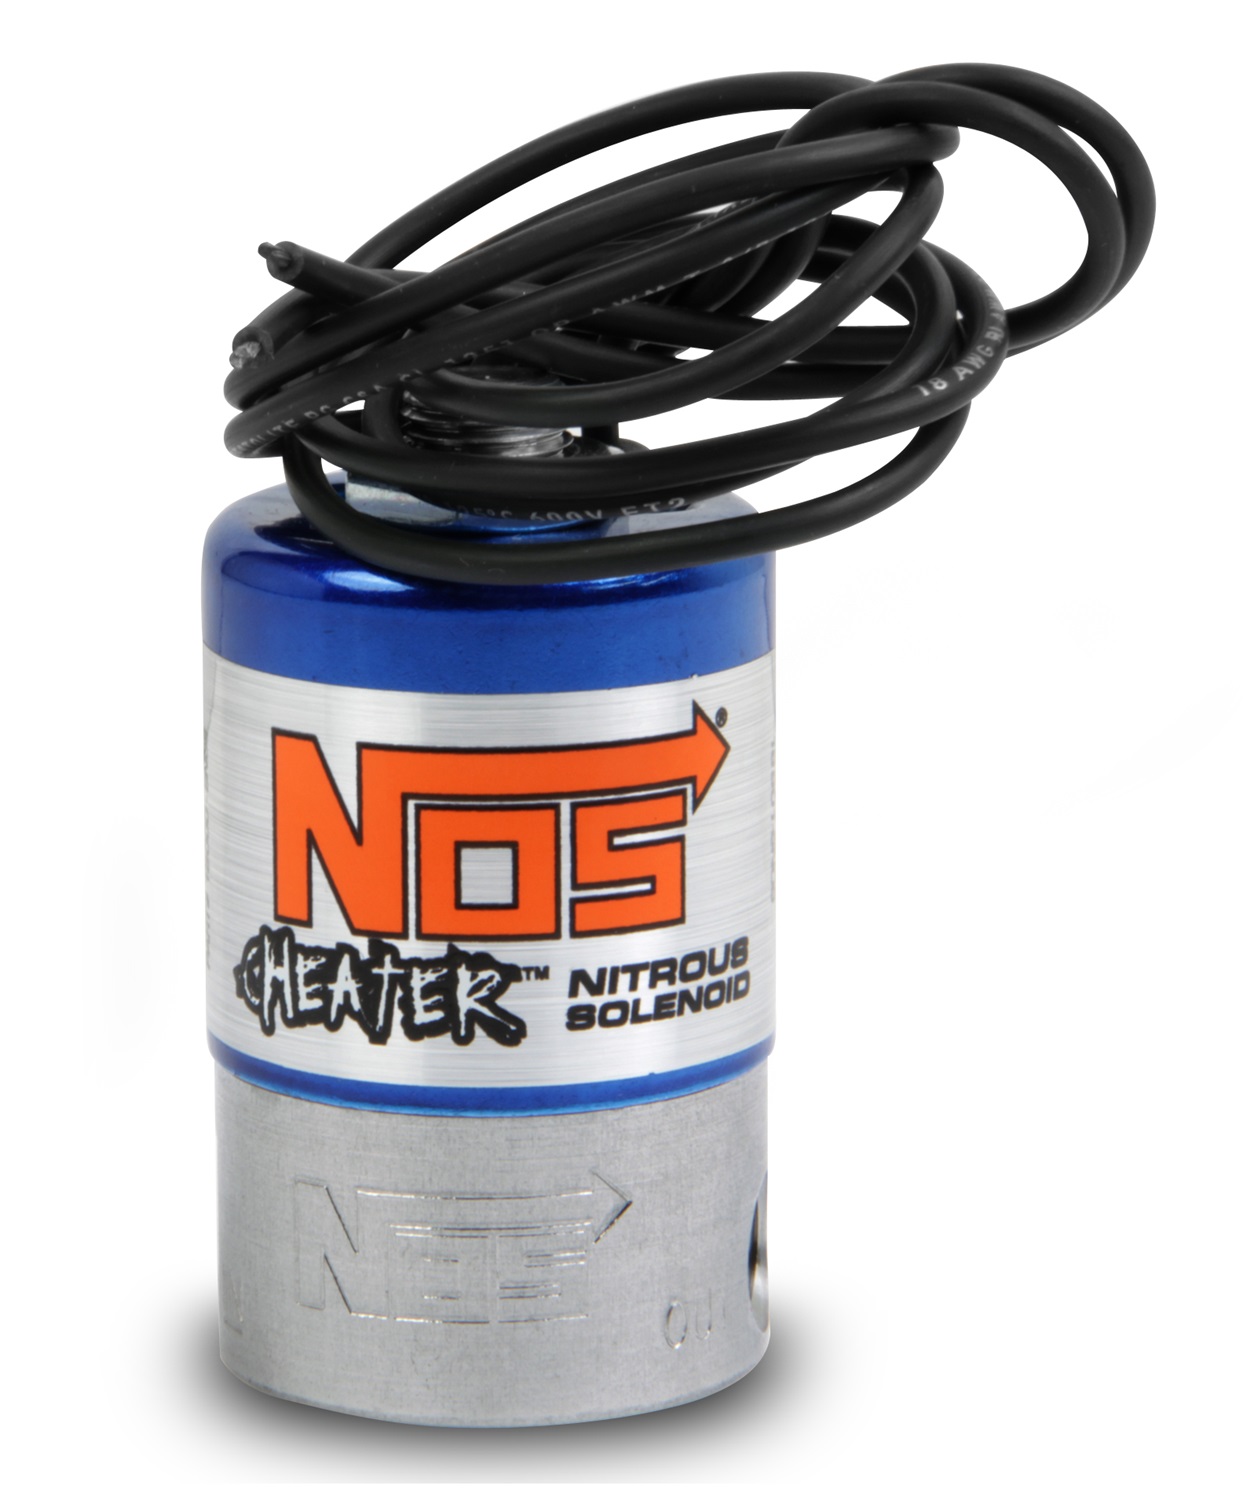 Nitrous Oxide Solenoid, NOS Solenoids and parts, CHEATER SOLENOID N2O